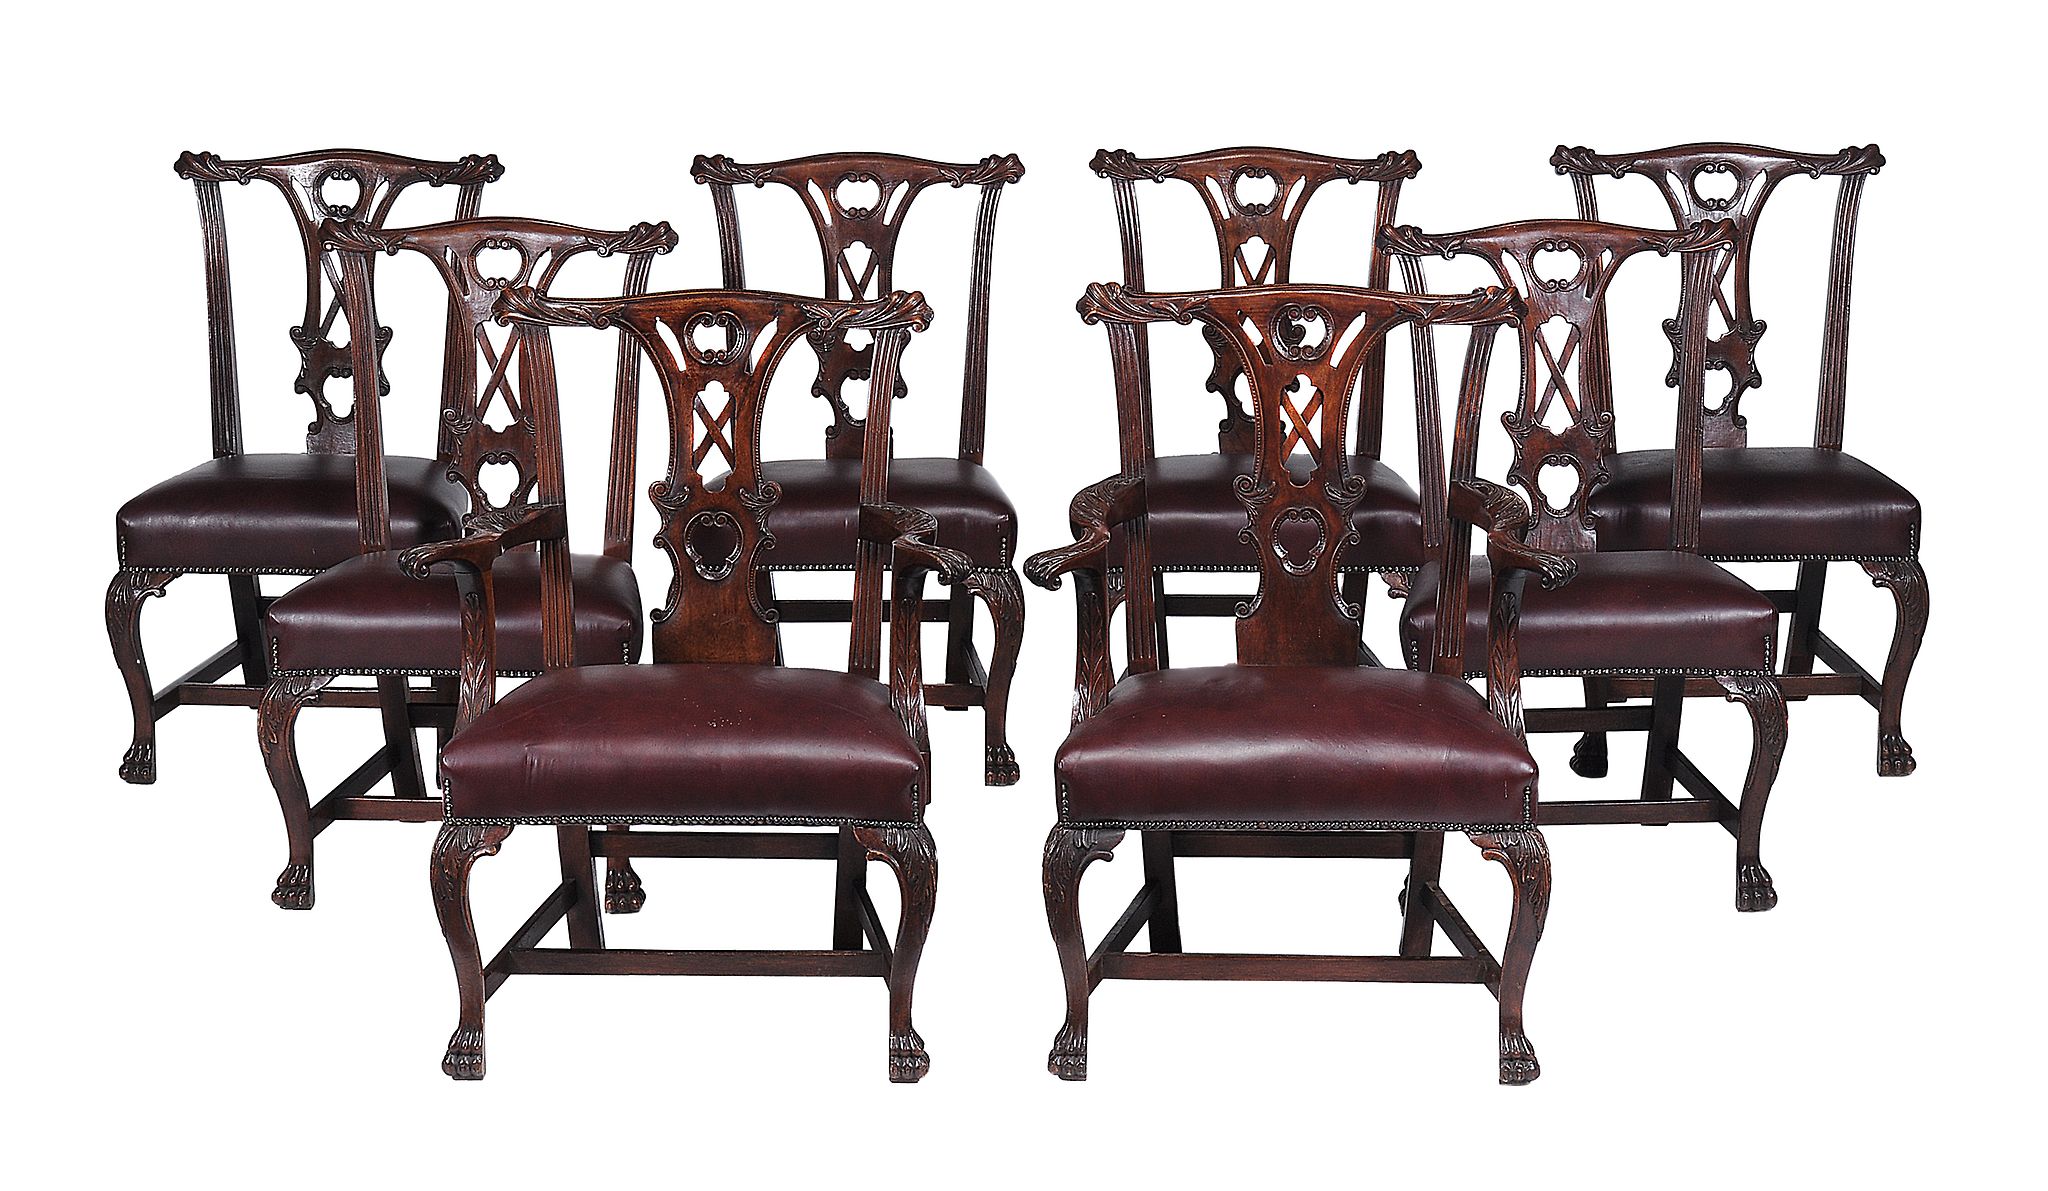 A set of eight mahogany dining chairs in Irish 18th century style   A set of eight mahogany dining